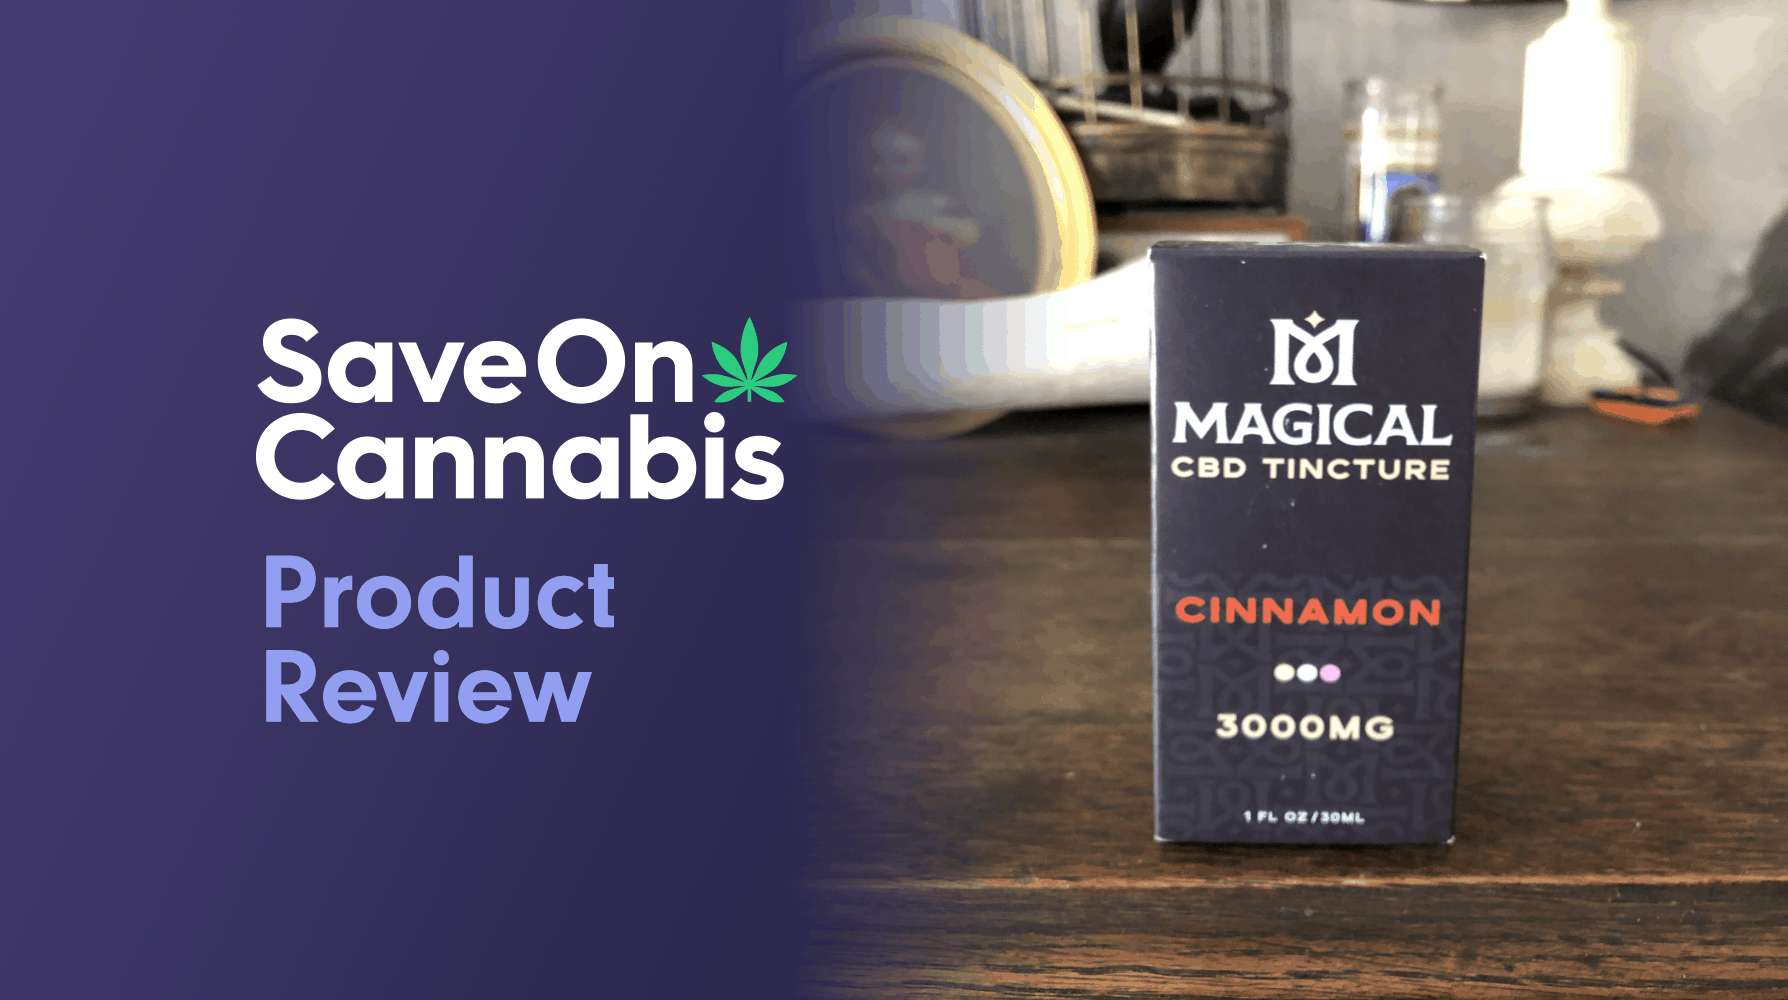 Magical CBD Tincture Cinnamon 3000 mg Review Save On Cannabis Review Website